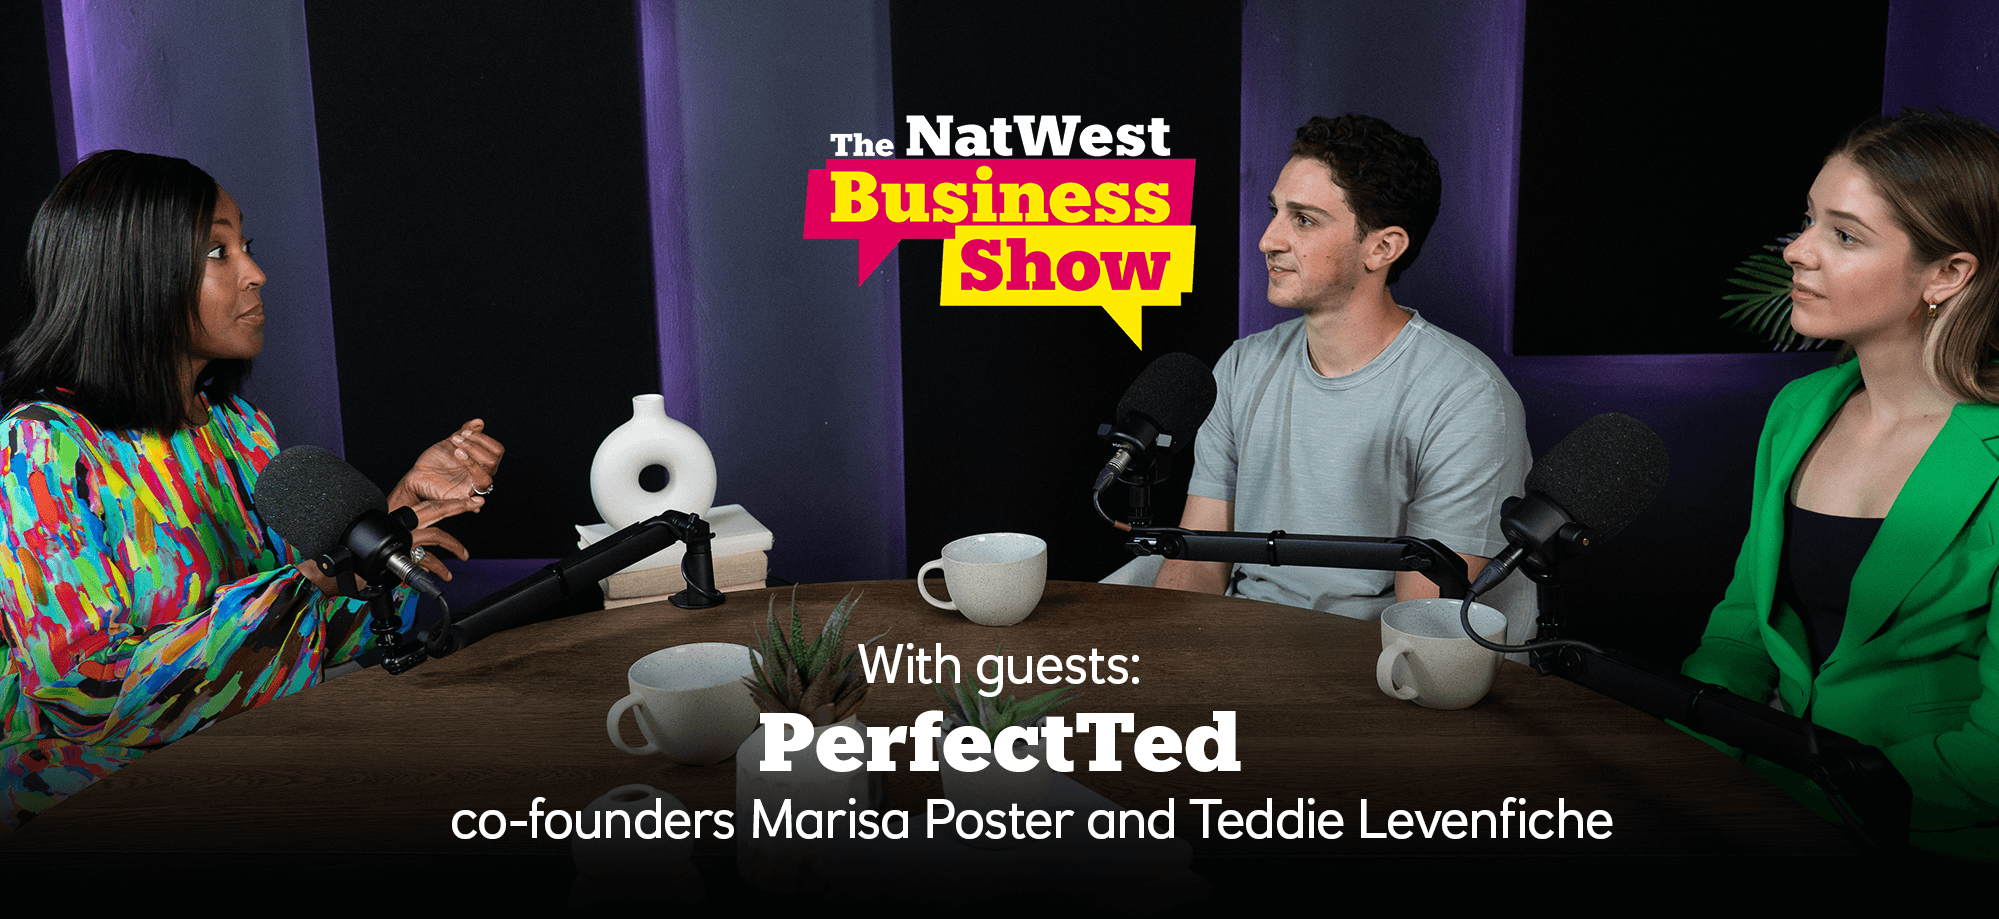 Angellica Bell and PerfectTed co-founders - Marisa Poster and Teddie Levenfiche